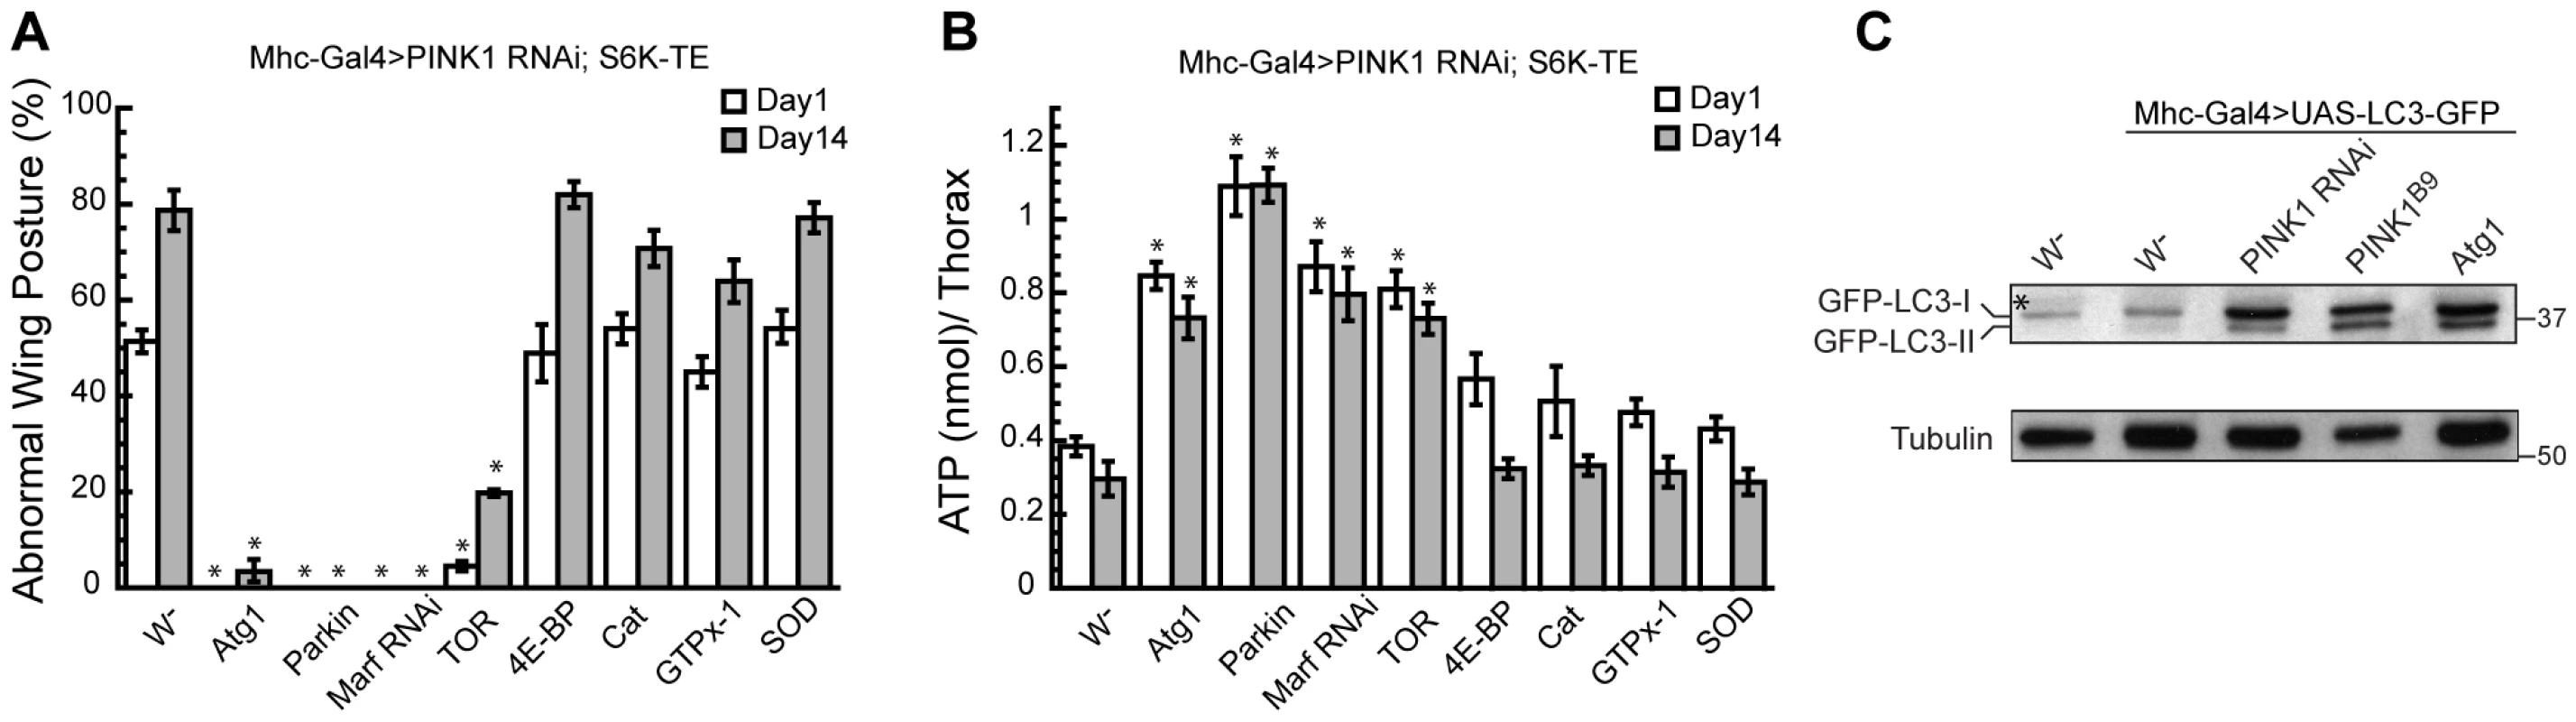 Atg1 OE rescues <i>PINK1</i> RNAi phenotype by inducing autophagy.